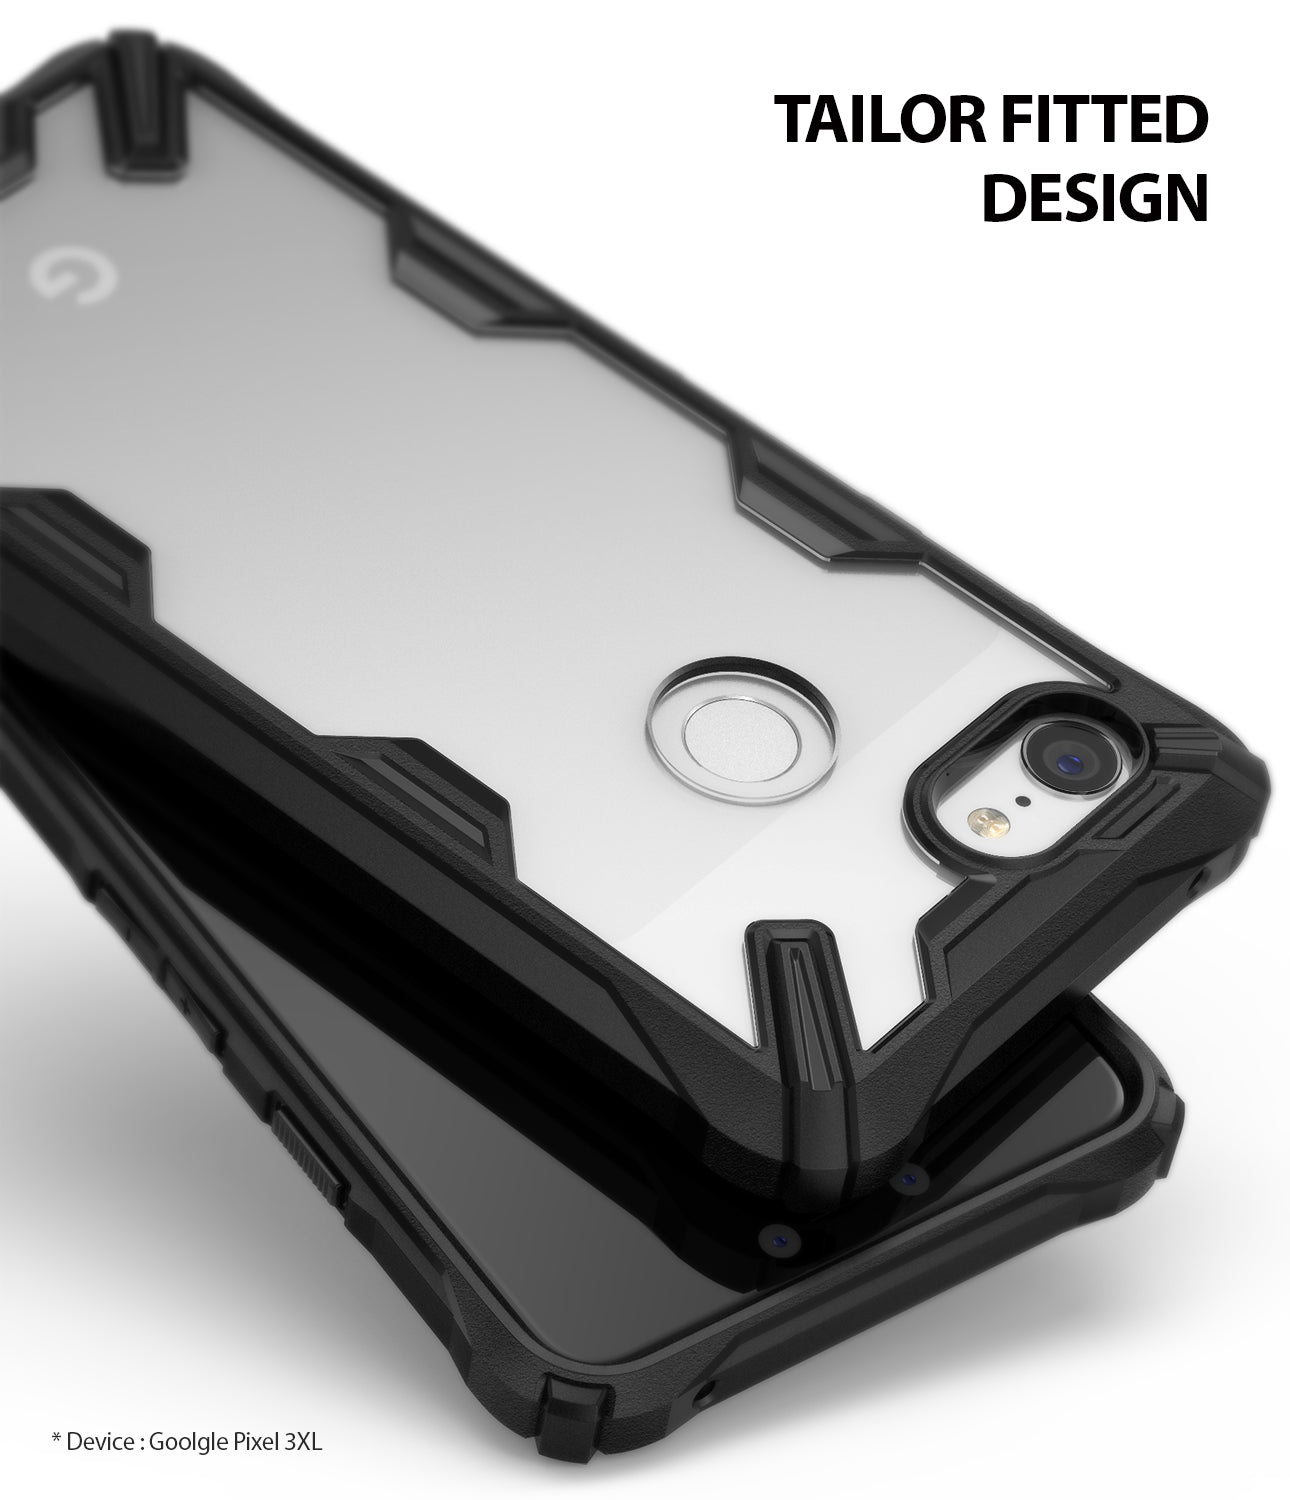 ringke fusion-x rugged heavy duty clear back case cover for google pixel 3 xl main case friendly